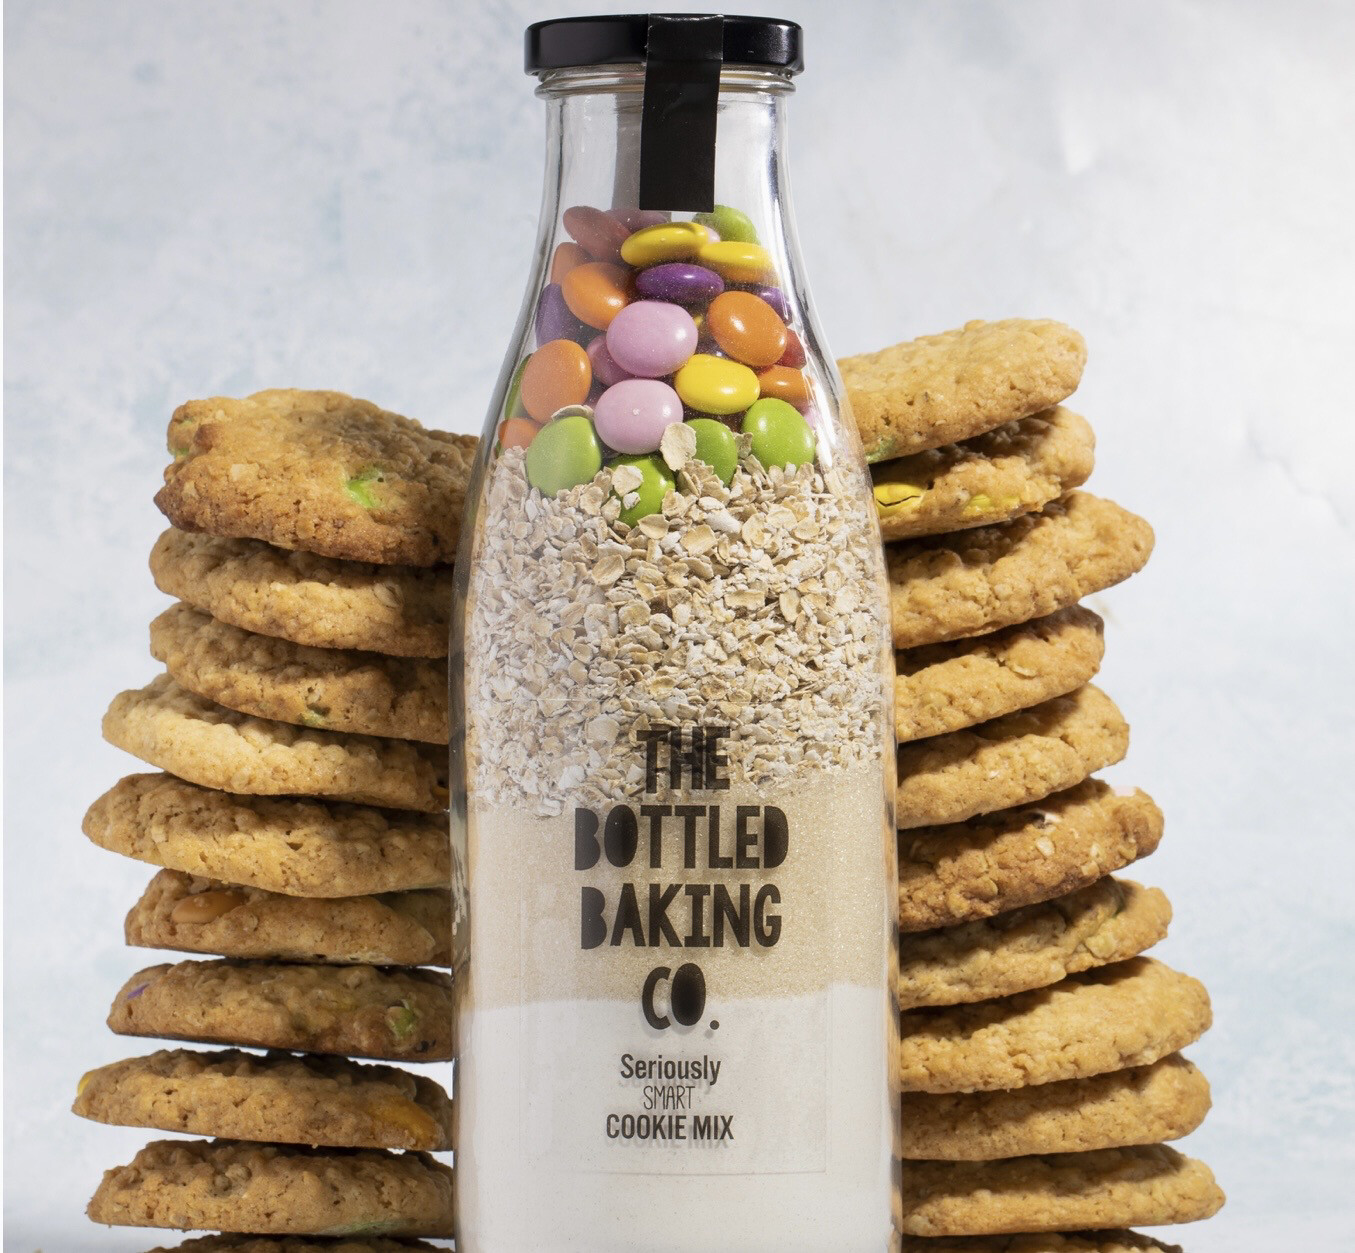 The Bottled Baking Co. Seriously Smart Cookie Mix